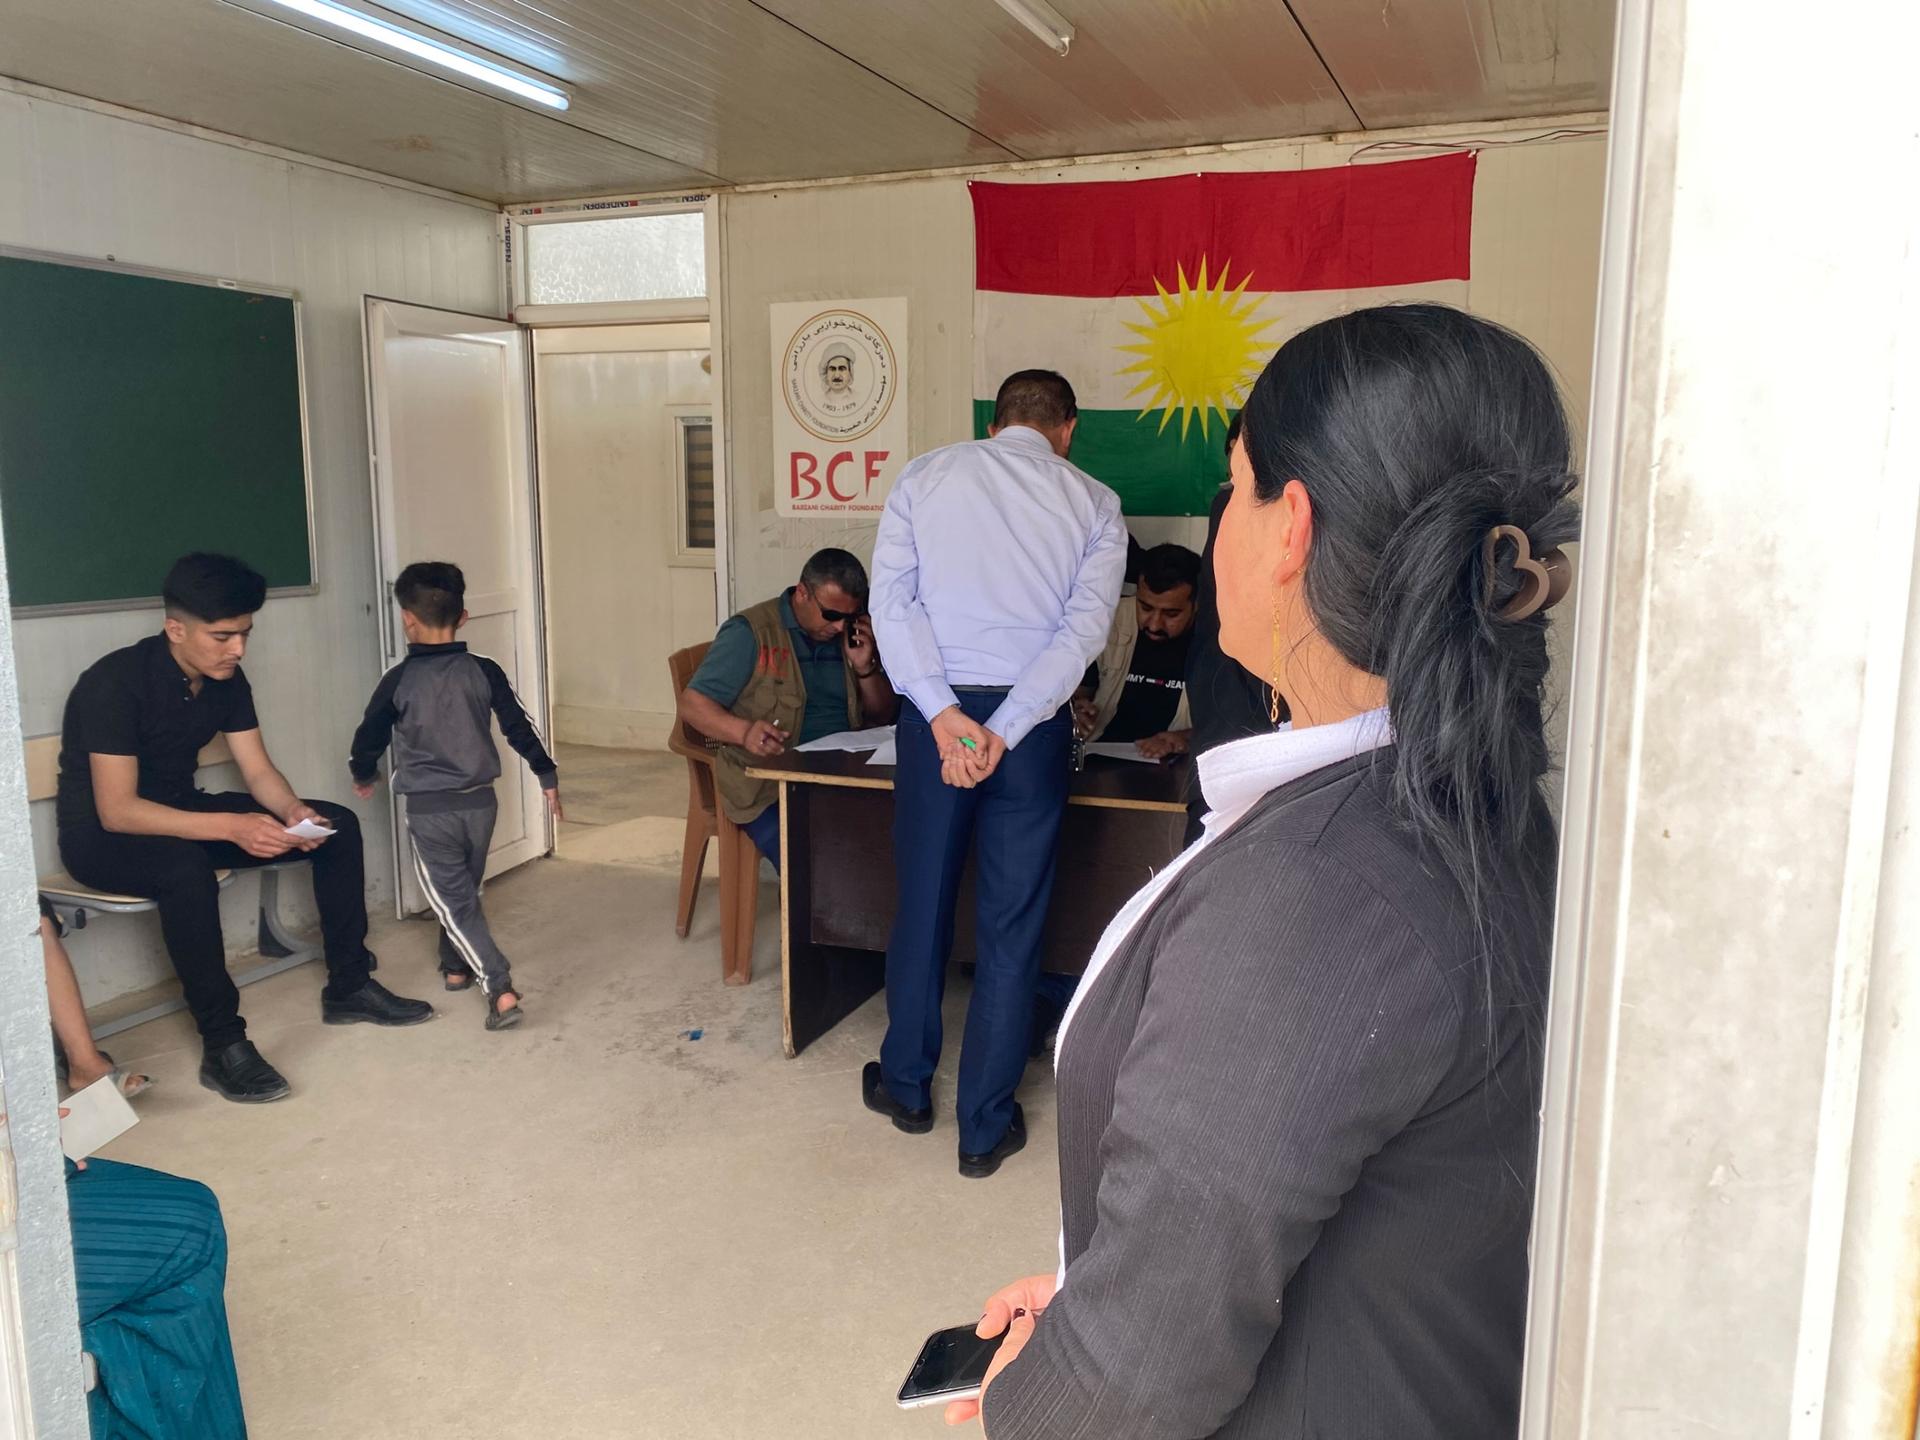 Shami Murad stands waiting for her turn to register for food aid at Sharya camp’s registration office, days after fleeing fighting in Sinjar. 